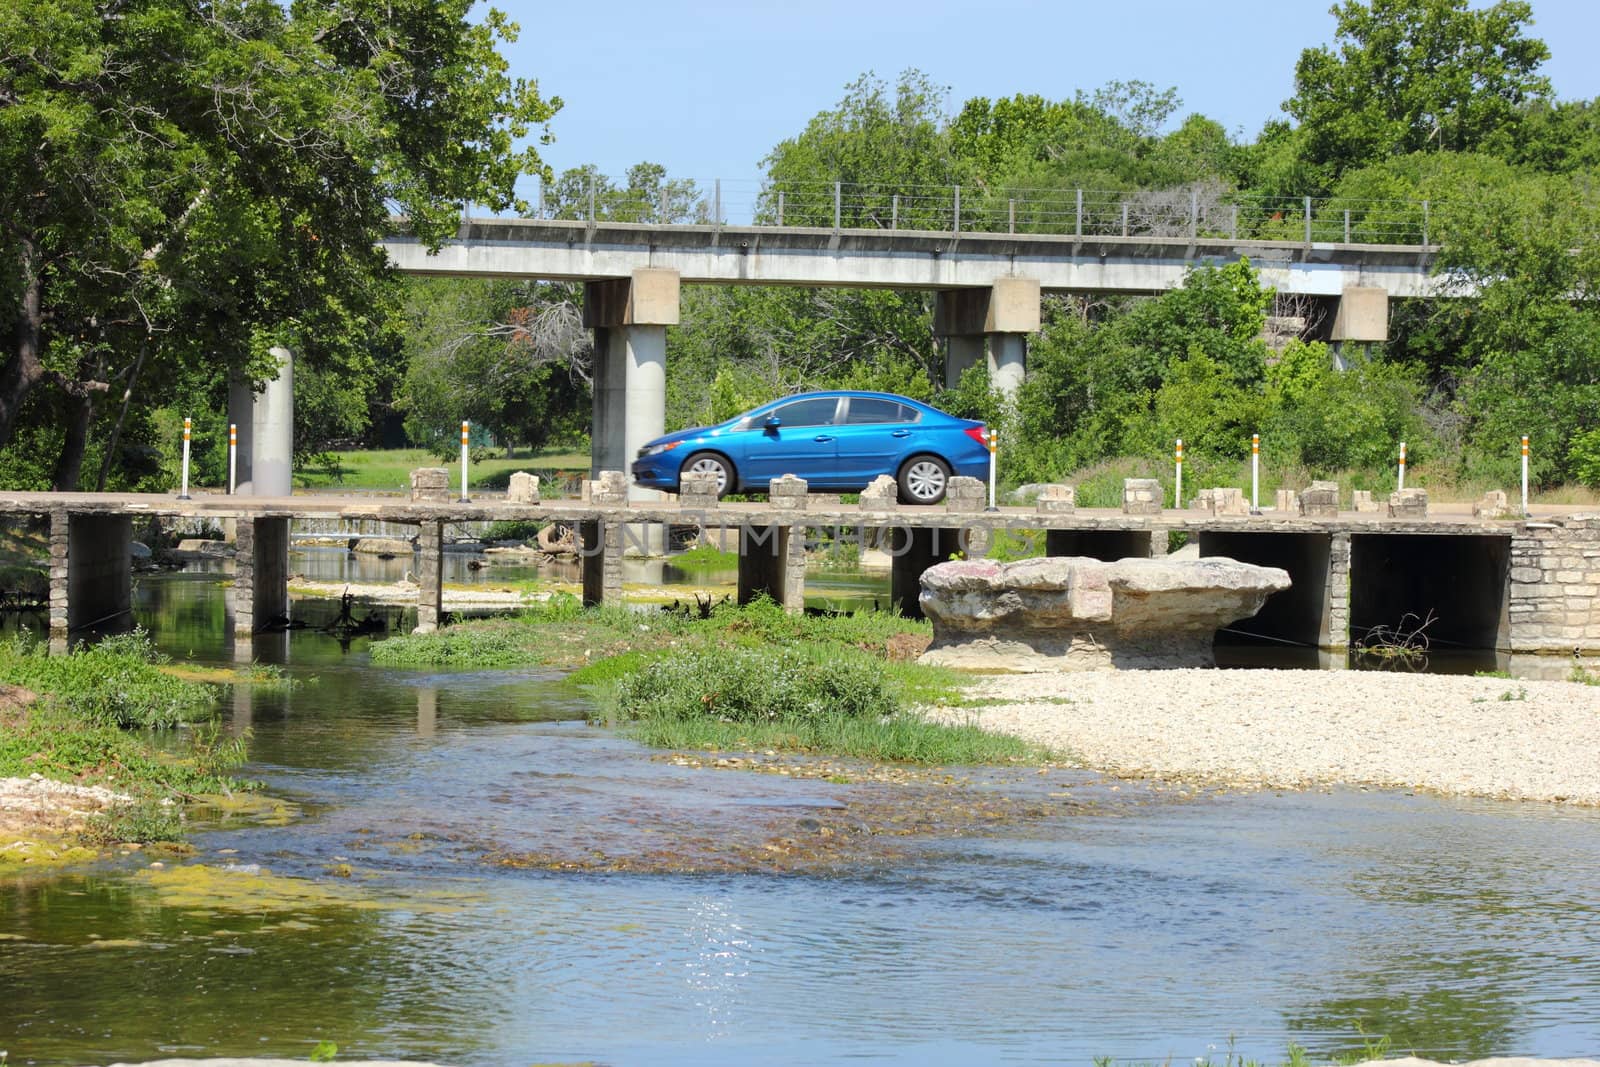 Blue car driving over an old small bridge with freeway in background.